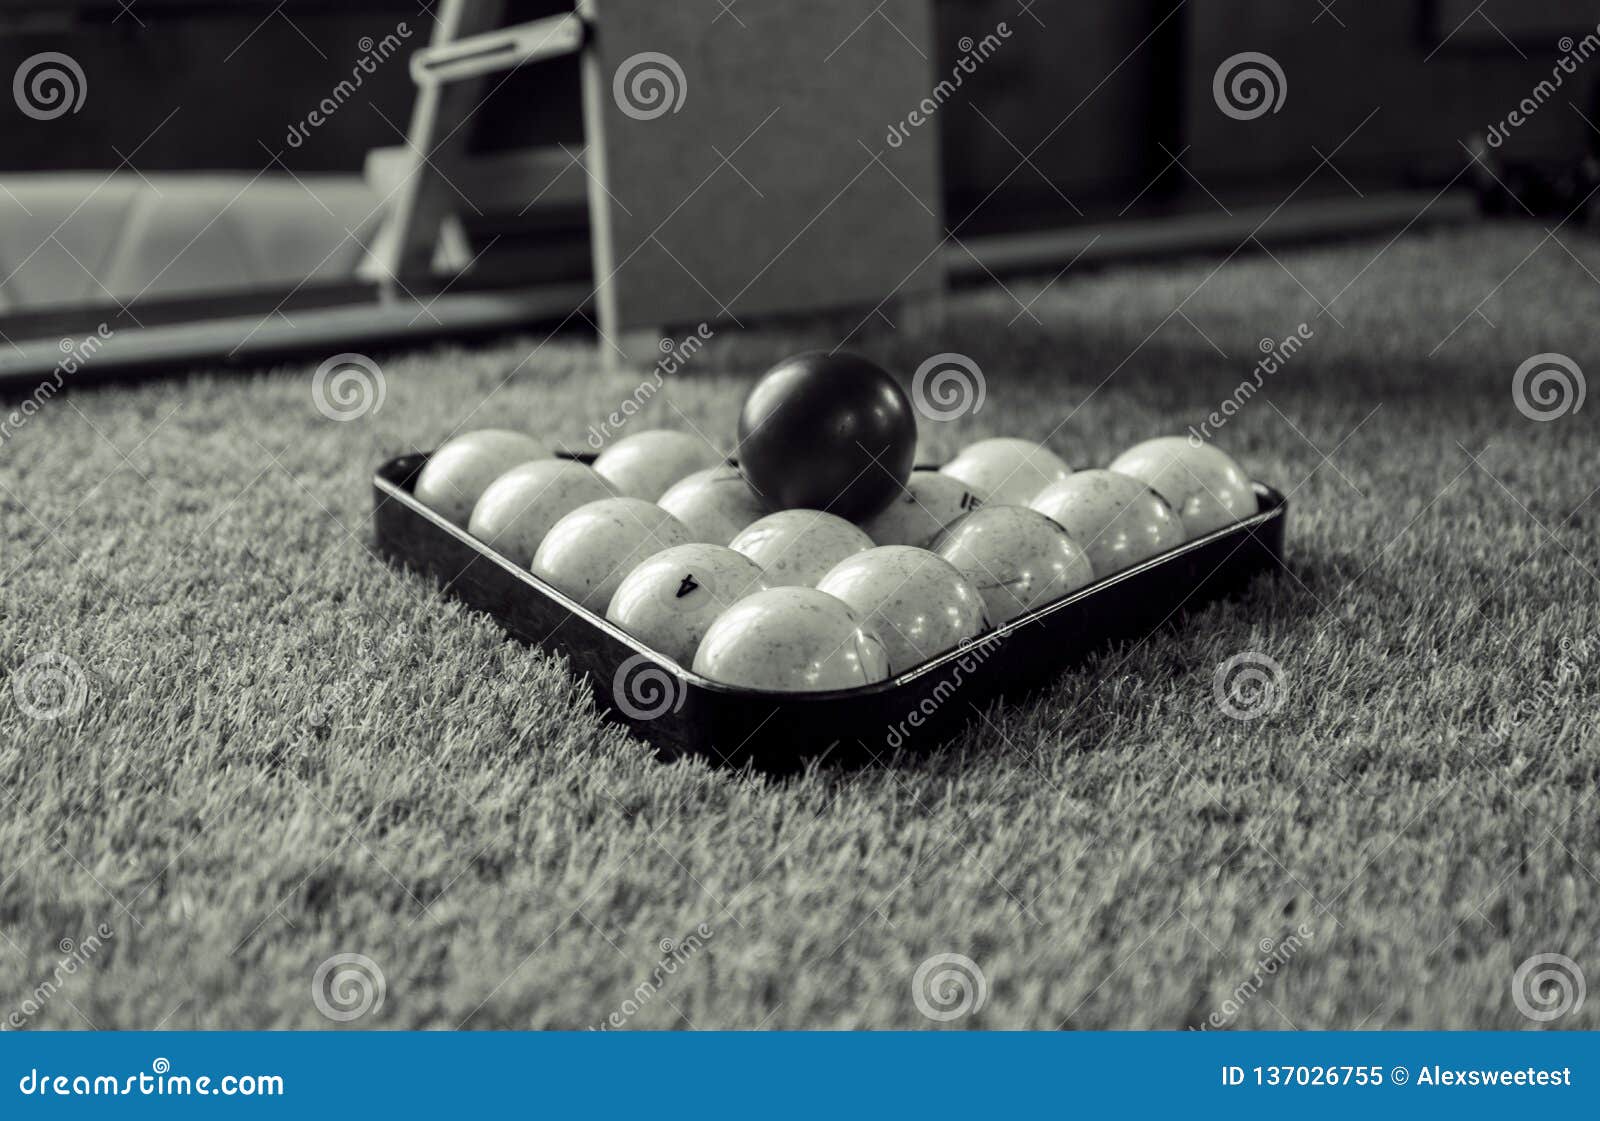 Billiard Balls on the Table Stock Image - Image of close, indoors ...